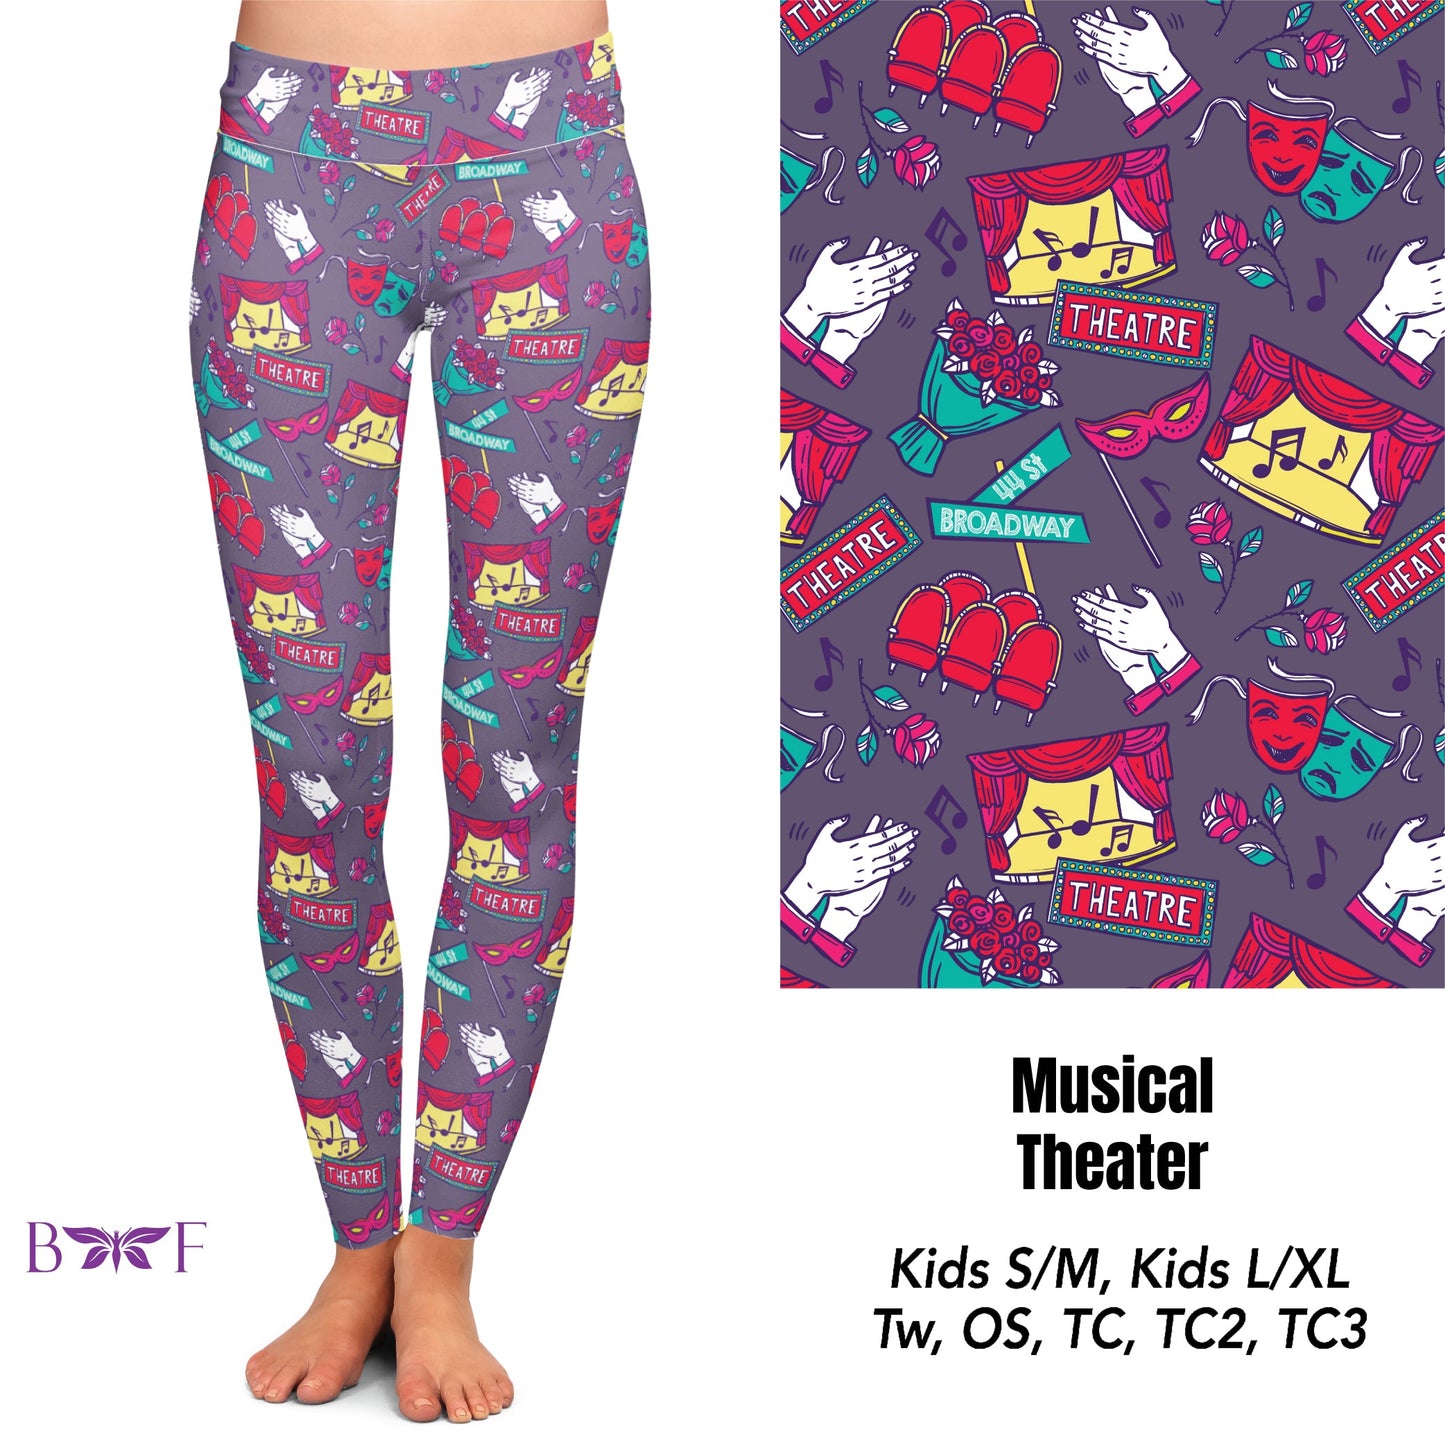 Musical Theater Leggings, Capris and Lounge Pants with pockets